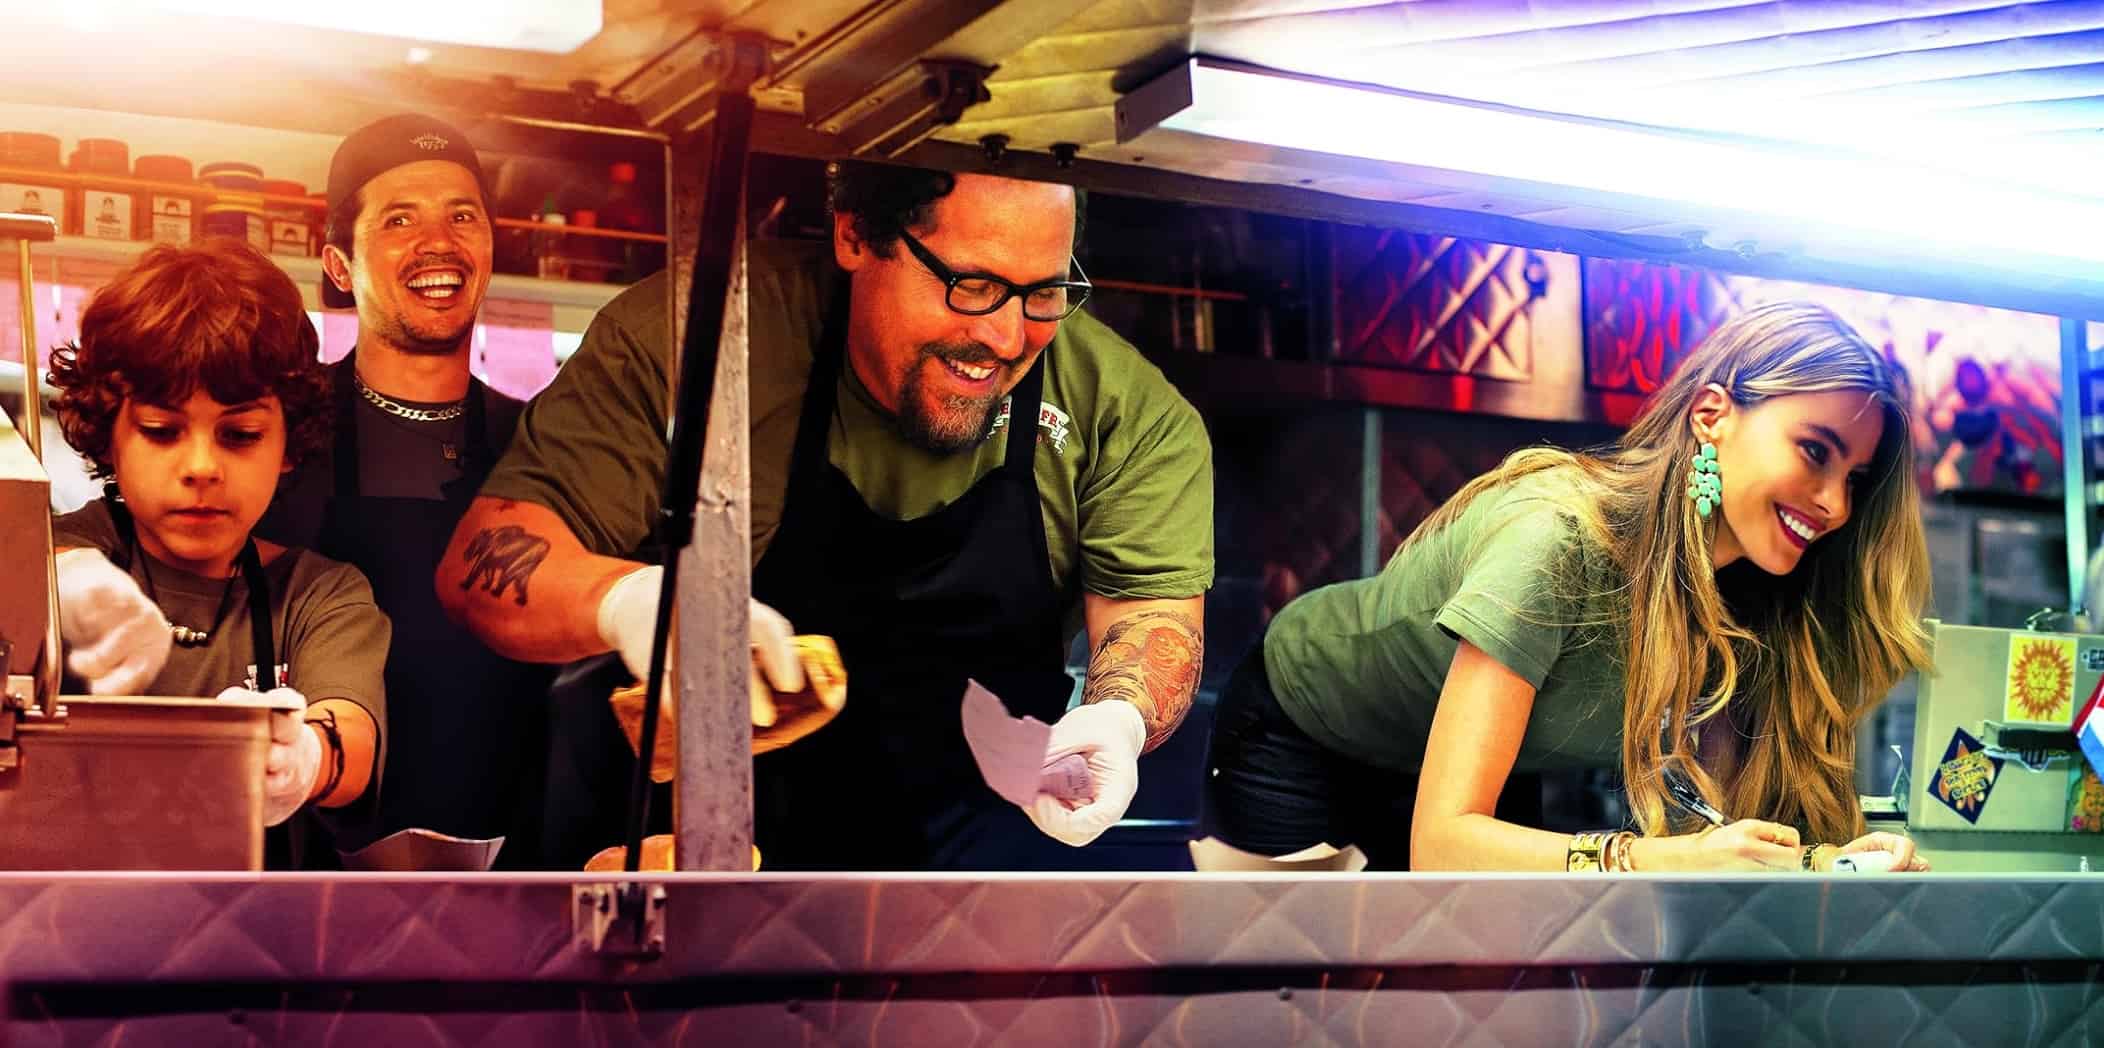 Two men, a boy, and a woman prepare sandwiches in a food truck in this image from Aldamisa Entertainment.